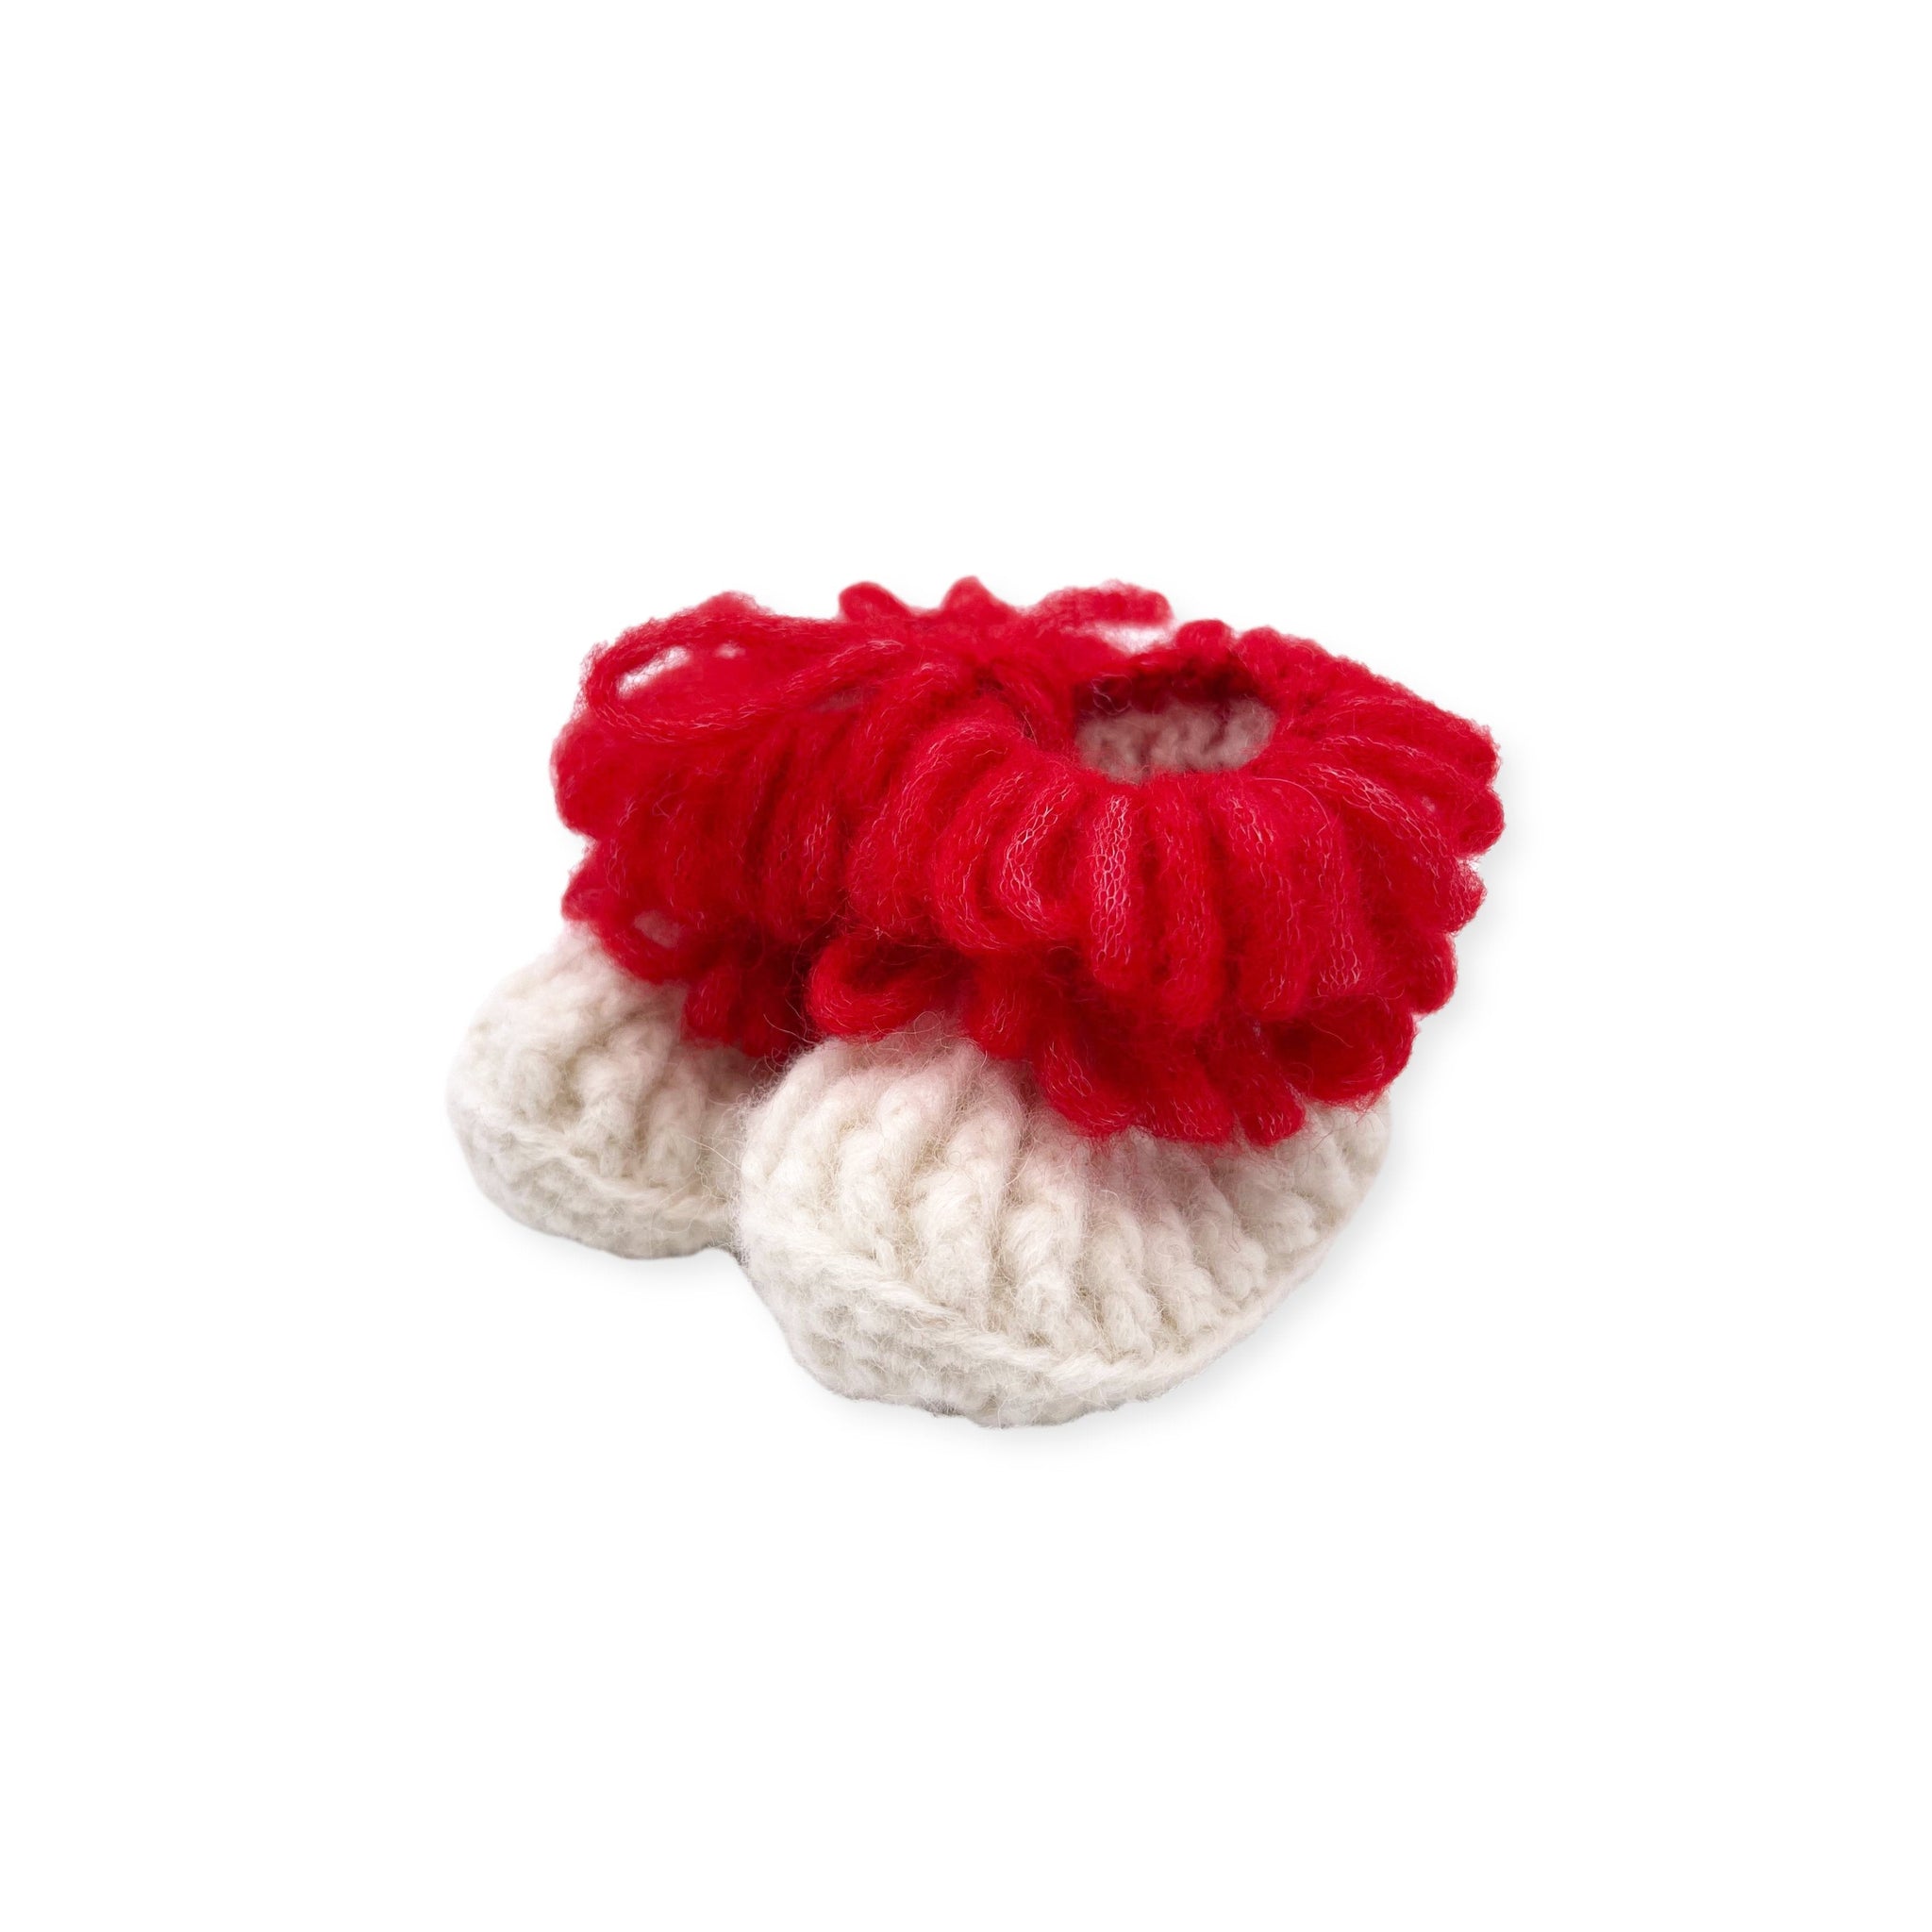 Julia B. Gift Wrap Hand Knitted Booties - Red